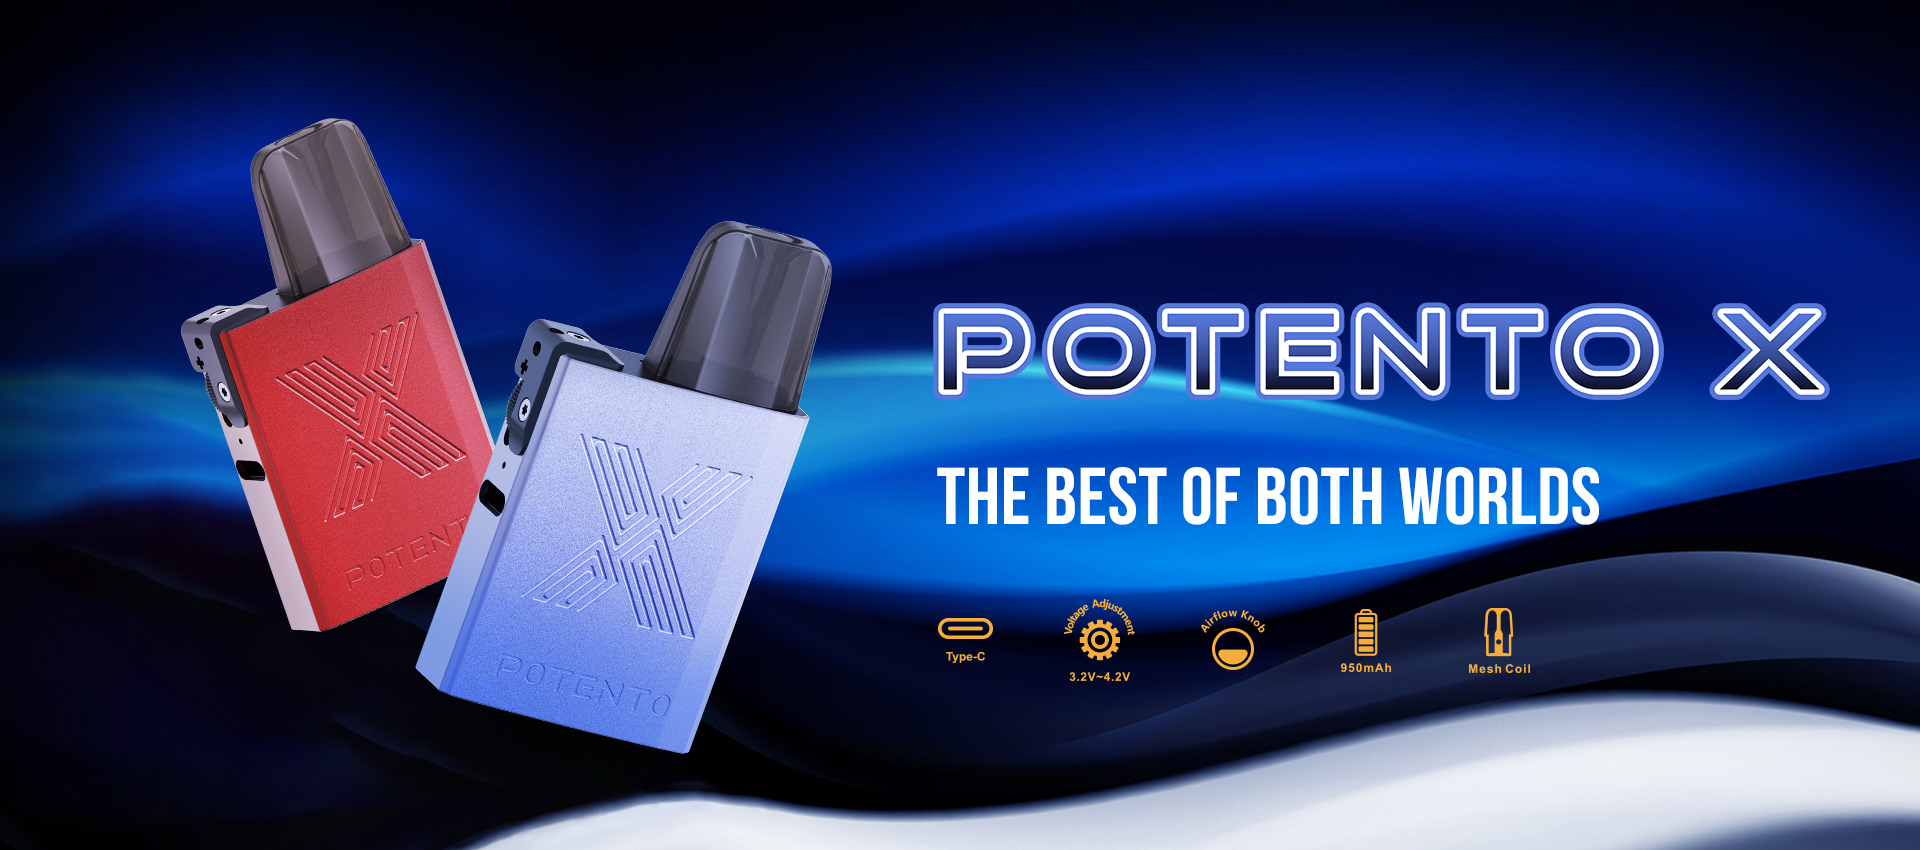 A short Review of Potento X